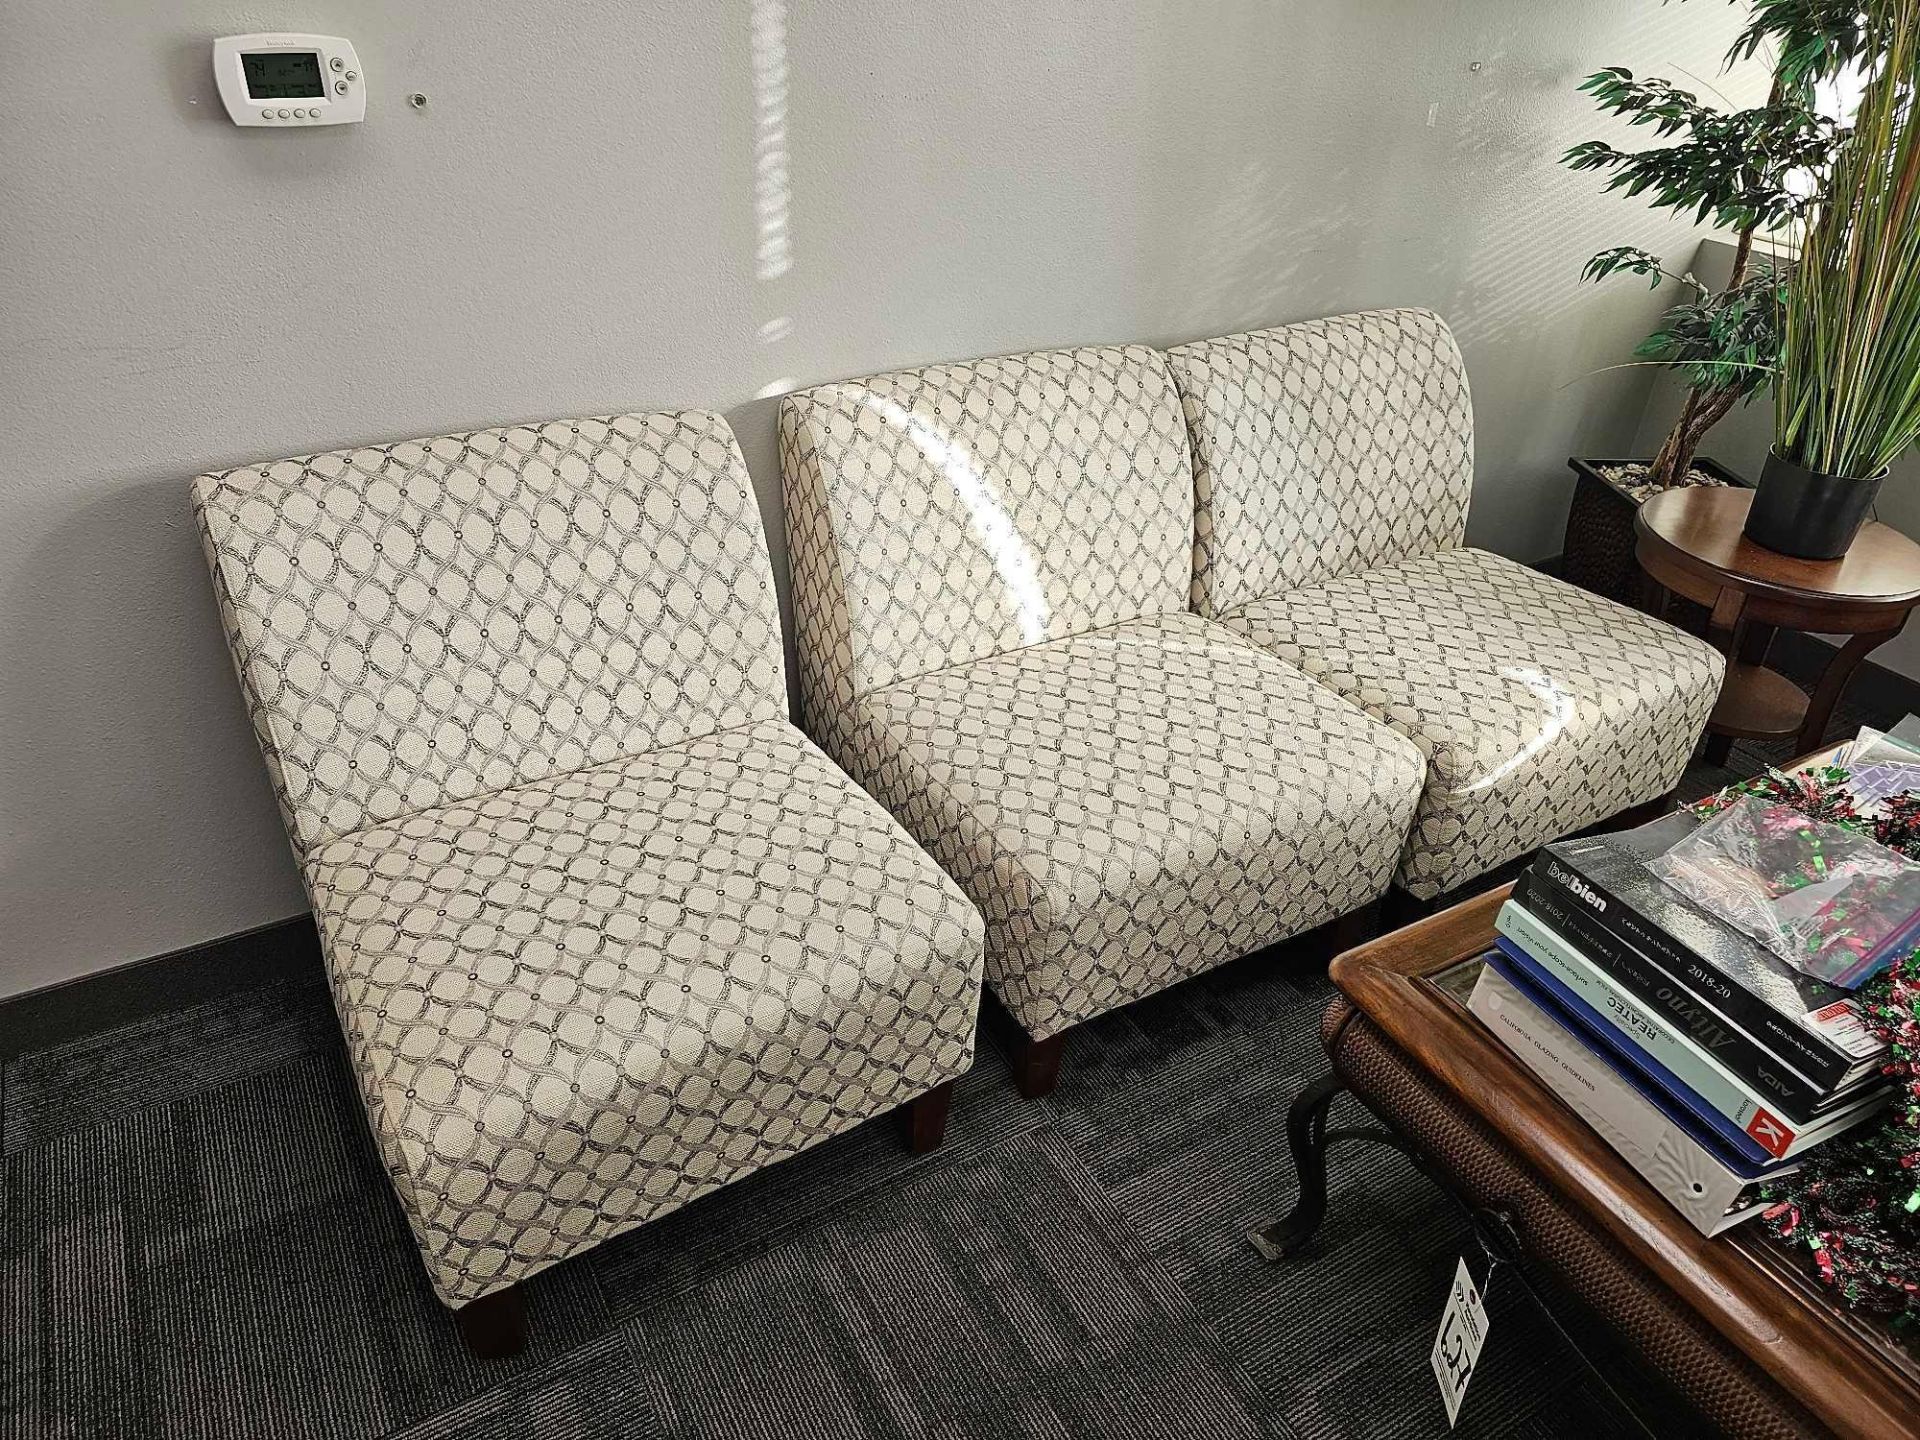 (4) CHAIRS, OFFICE CHAIR, COUCH AND TABLES (NO CONTENTS) - Image 2 of 6